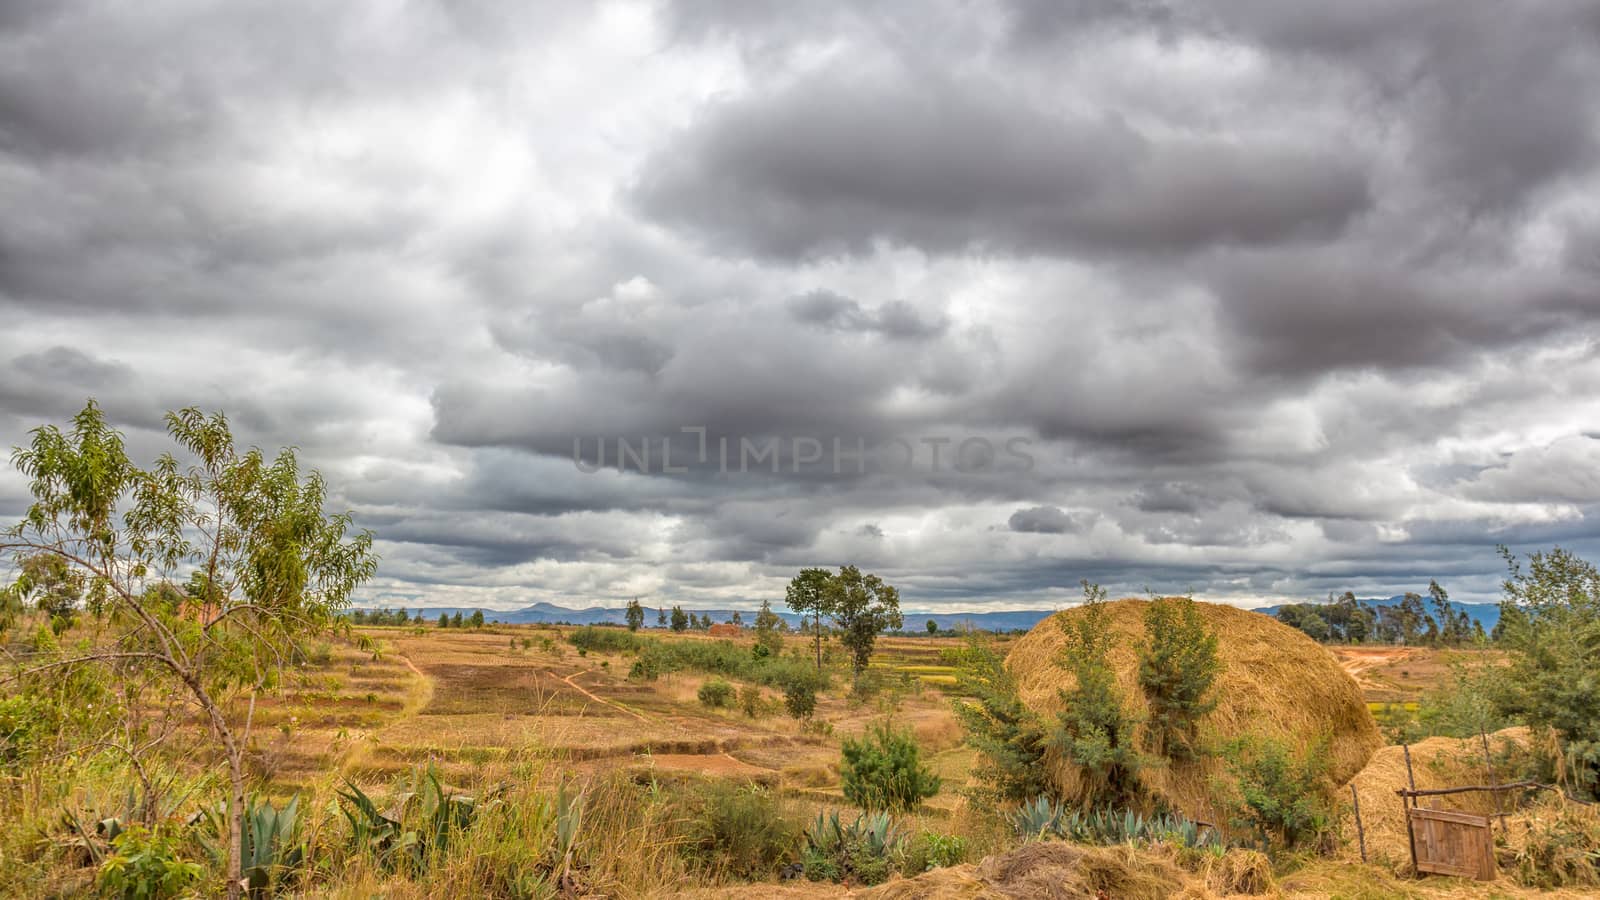 Dark clouds hovering over the fields by derejeb